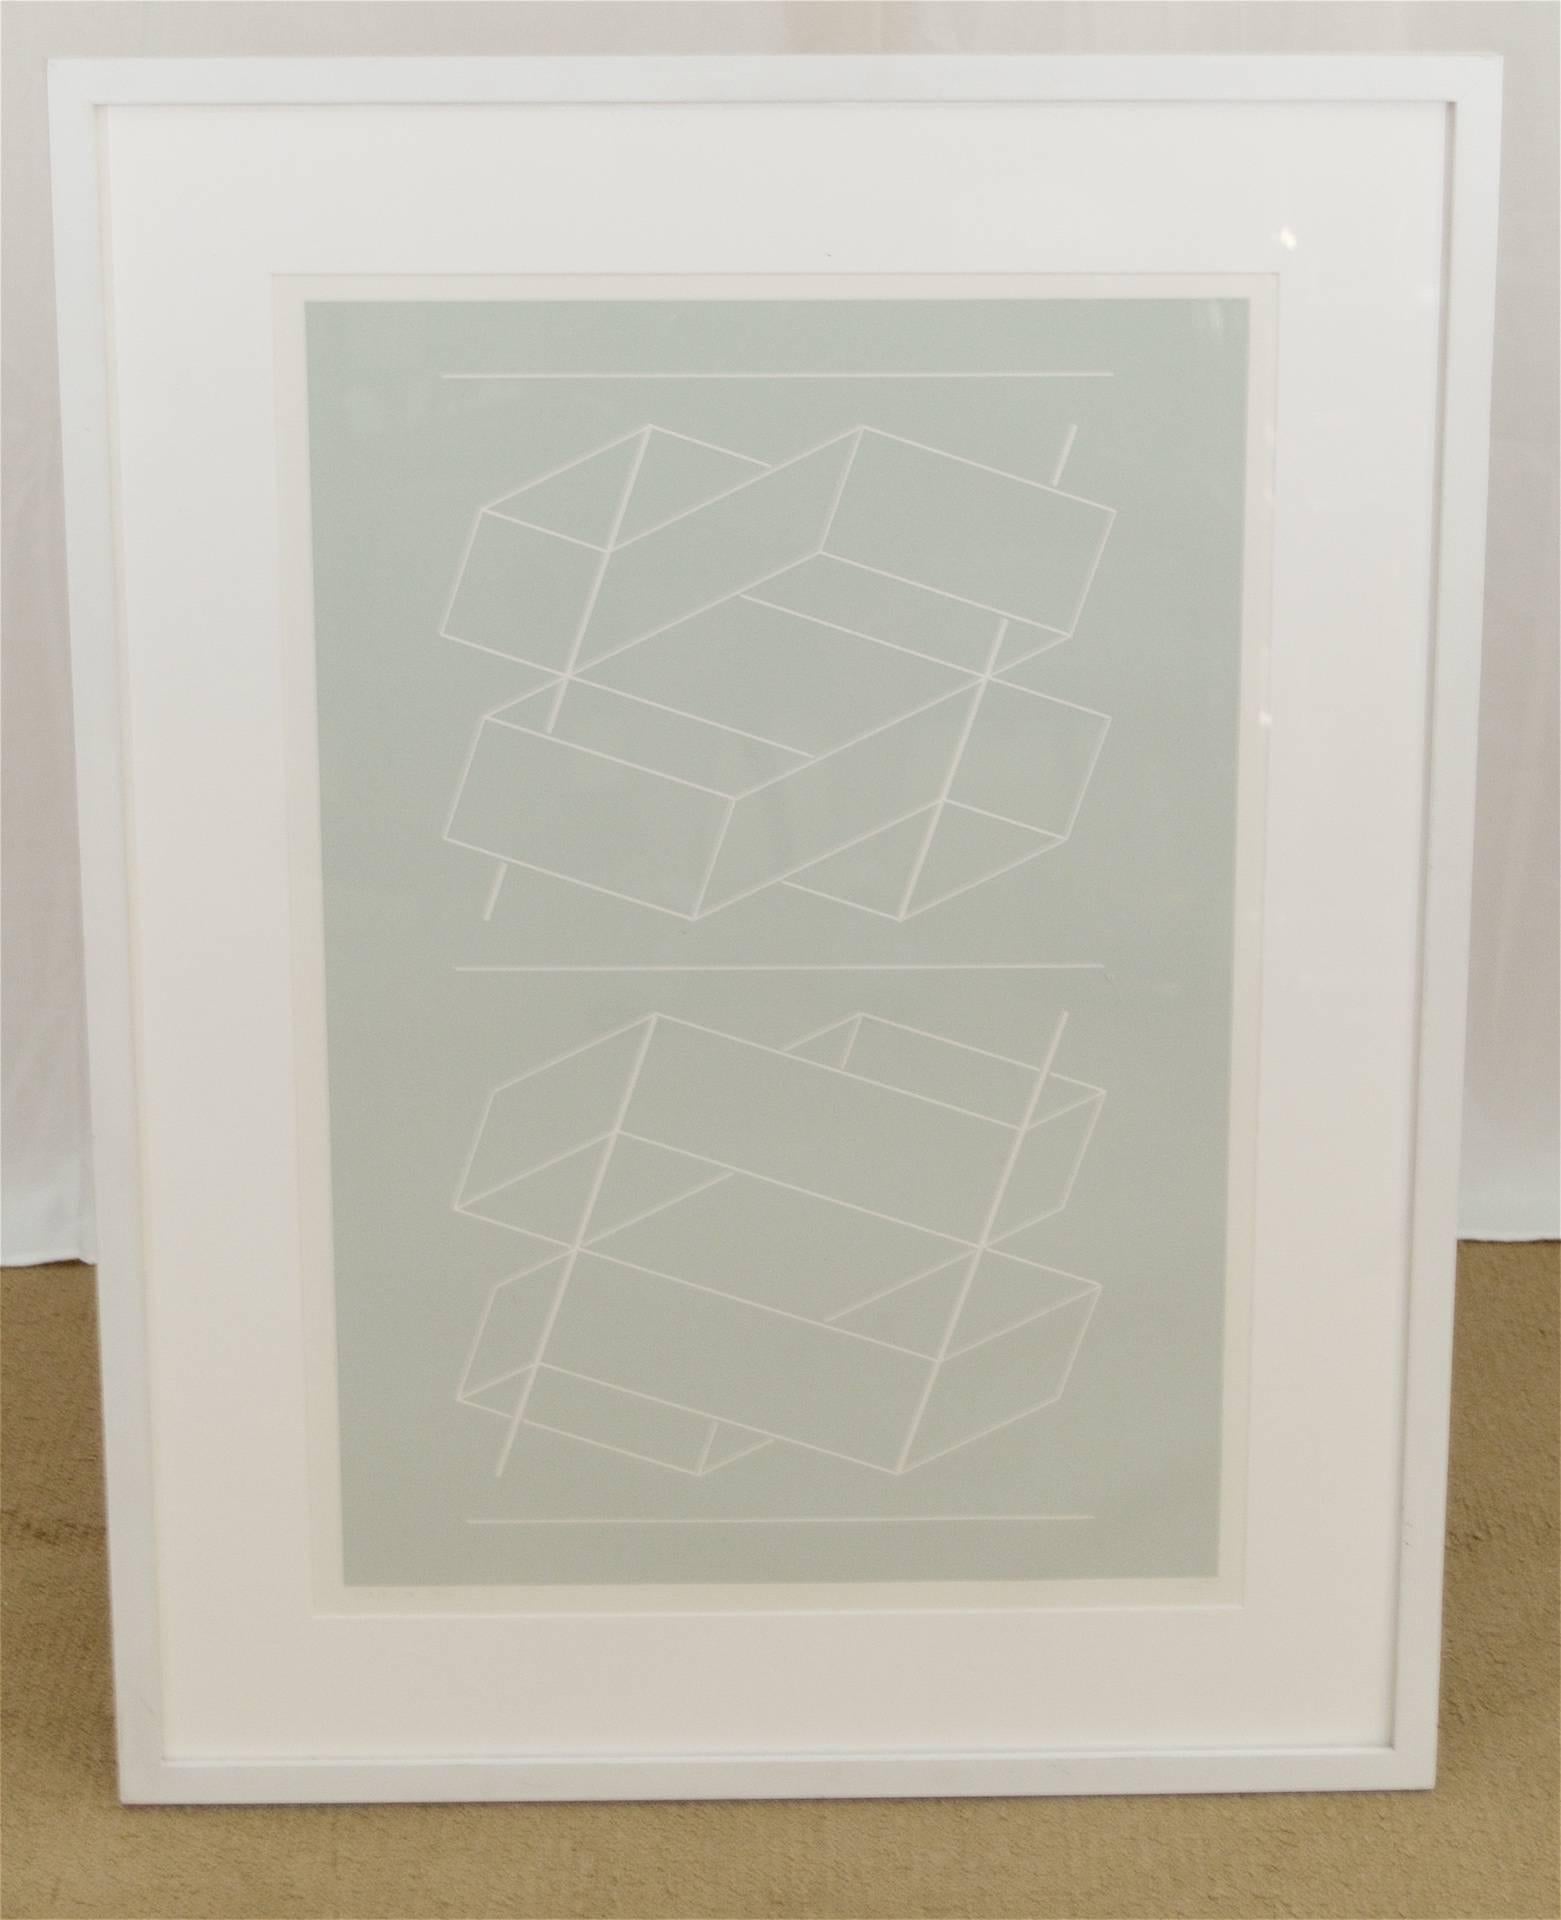 Josef Albers structural heavily embossed linocut print in grey on white. 

Number 55 from the edition of 125. printed and published by Gemini GEL, 1971.   

Literature: National Gallery of Art online catalogue raisonne for Gemini GEL, number 2.29;